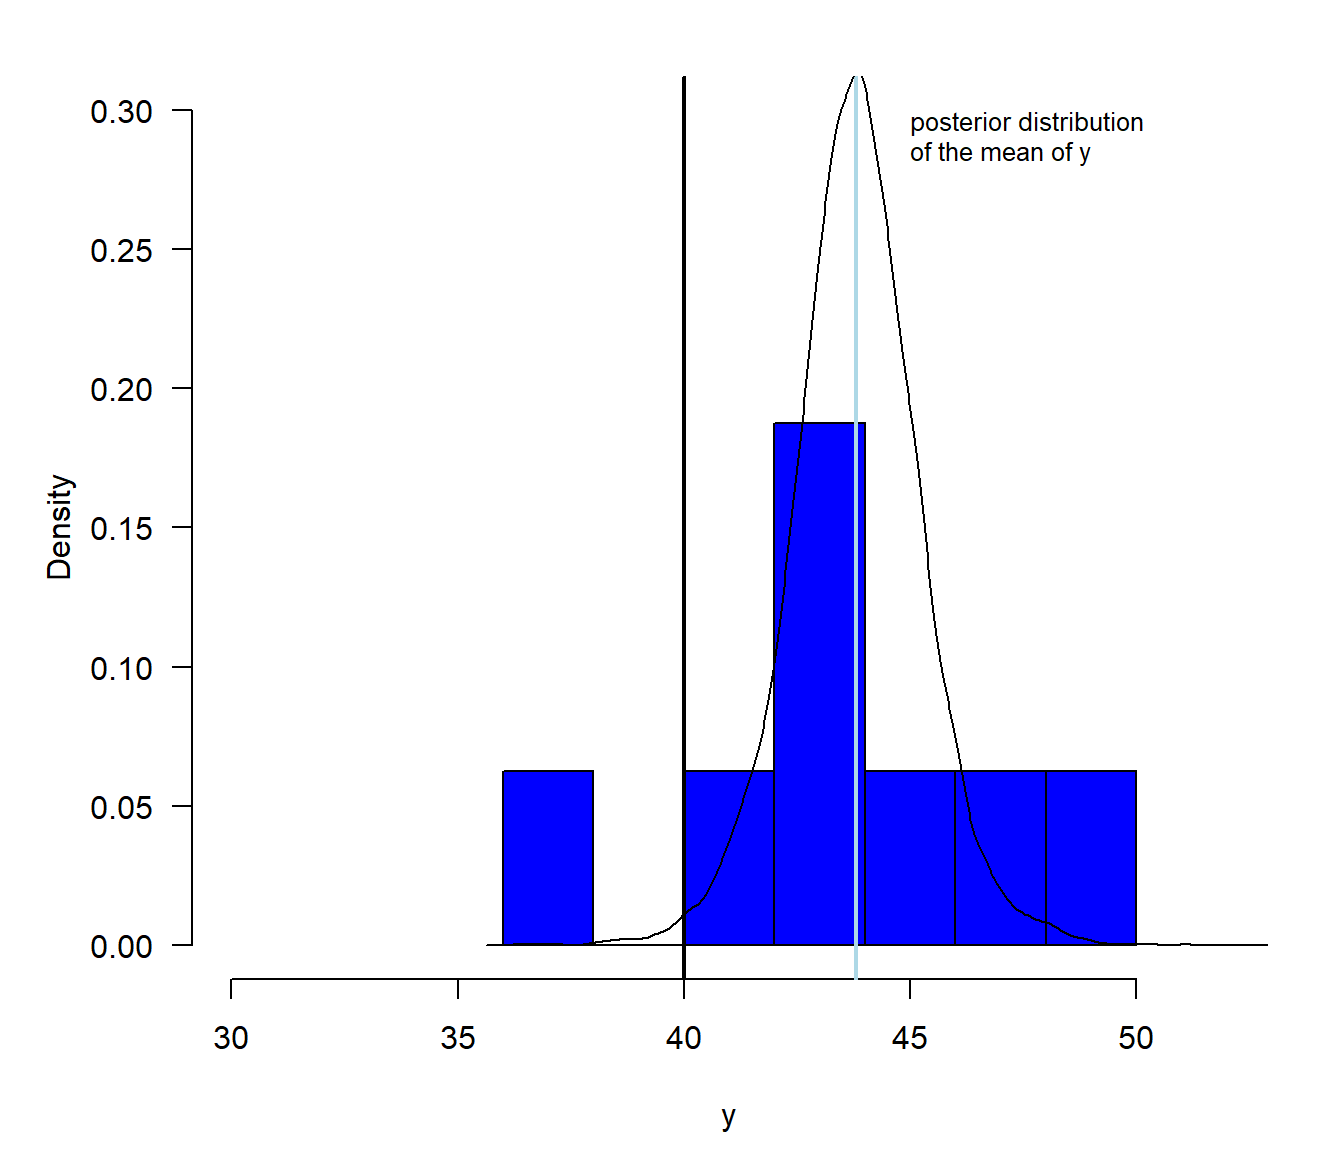 Illustration of the posterior distribution of the mean. The blue histogram shows the distribution of the measured weights with the sample mean (lightblue) indicated as a vertical line. The black line is the posterior distribution that shows what we know about the mean after having looked at the data. The area under the posterior density function that is larger than 40 is the posterior probability of the hypothesis that the true mean Snwofinch weight is larger than 40g.